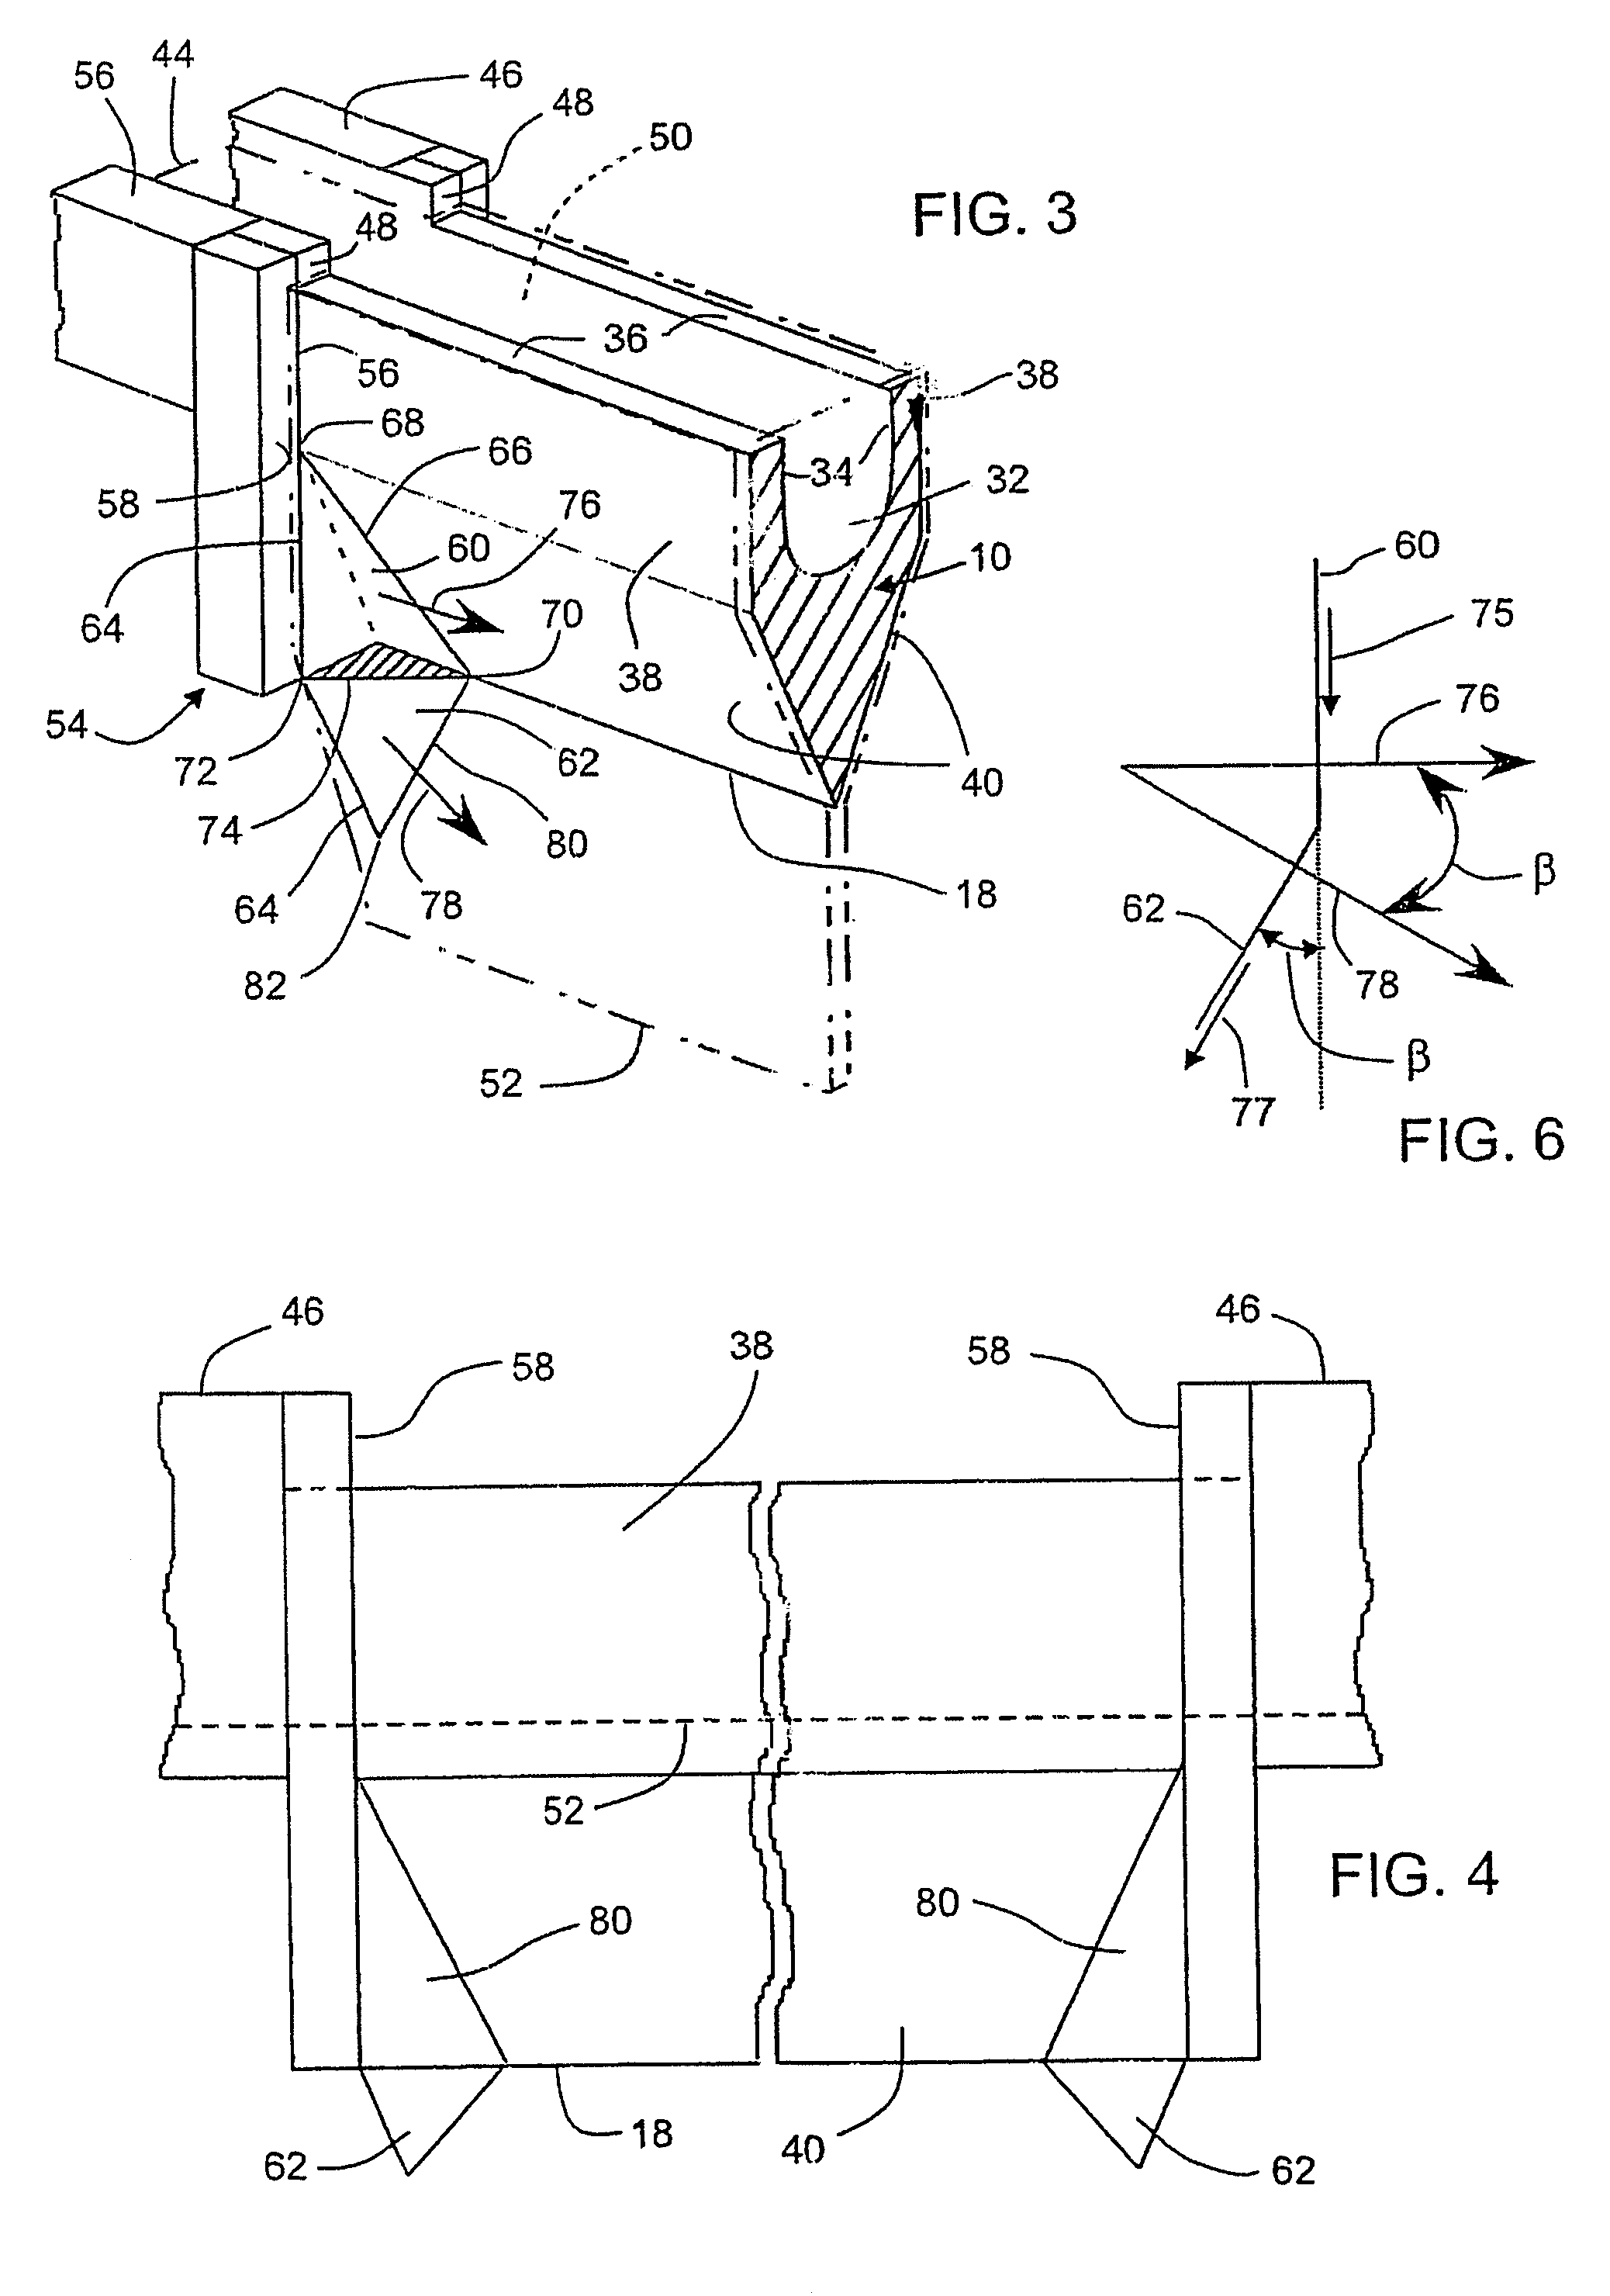 Method and apparatus for making a glass sheet